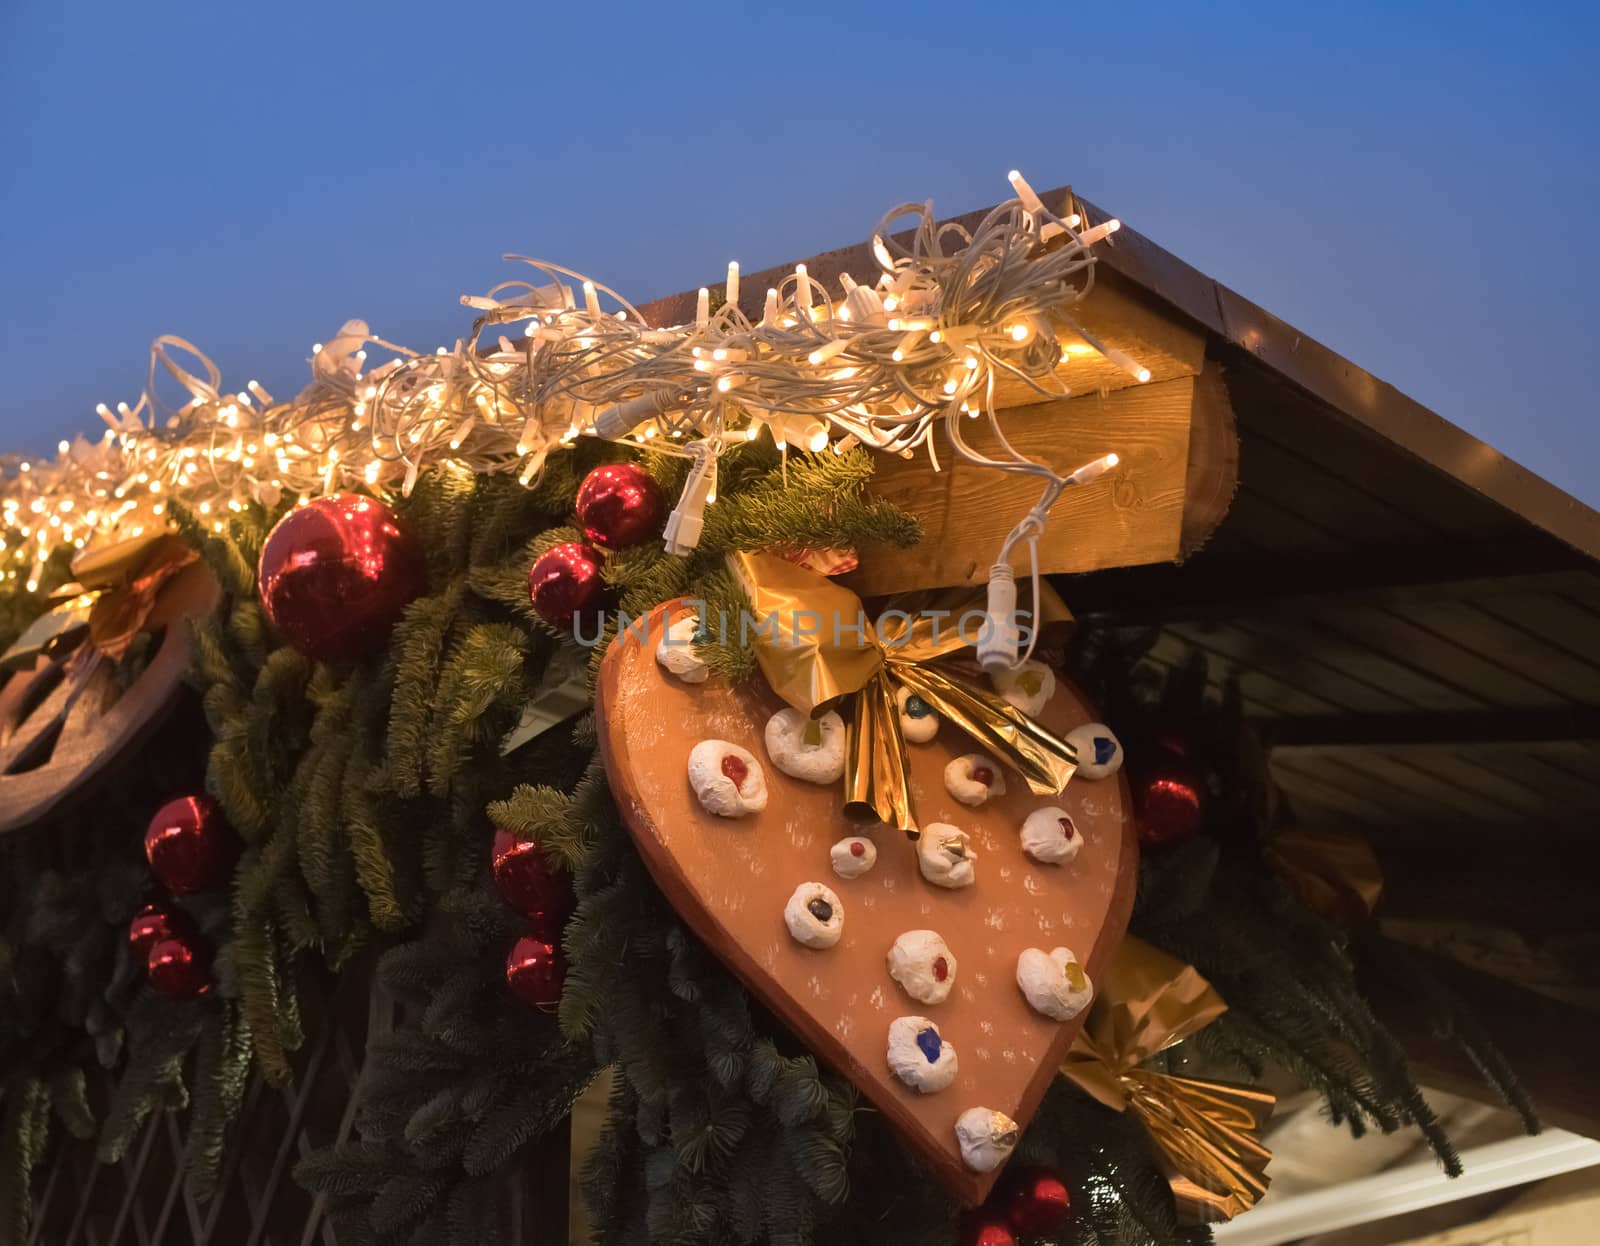 Gingerbread  and  garland at the Christmas market by vicdemid